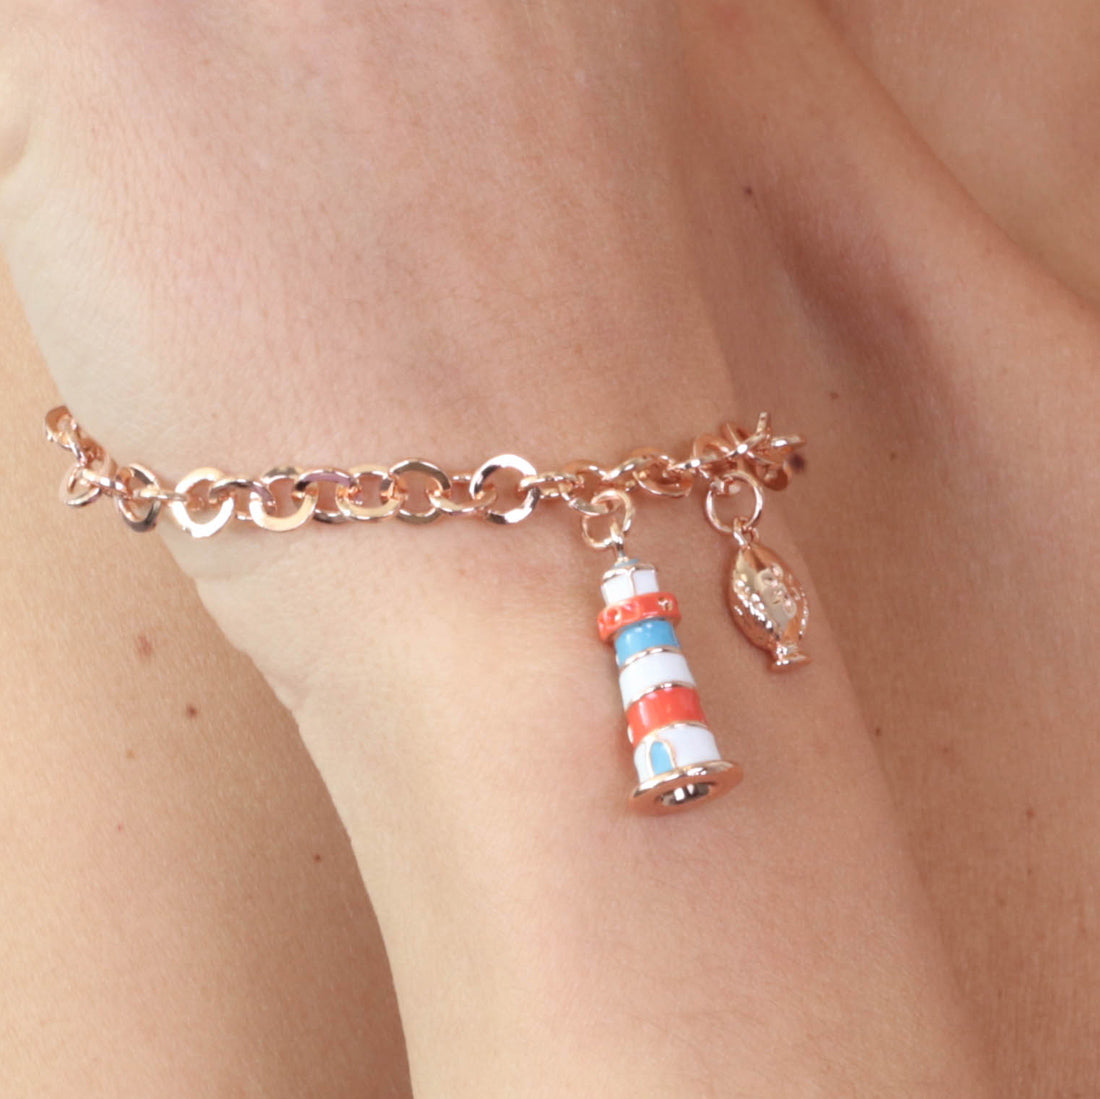 Metal bracelet with pendant lighthouse pendant, embellished with colored glazes and small pump on the side